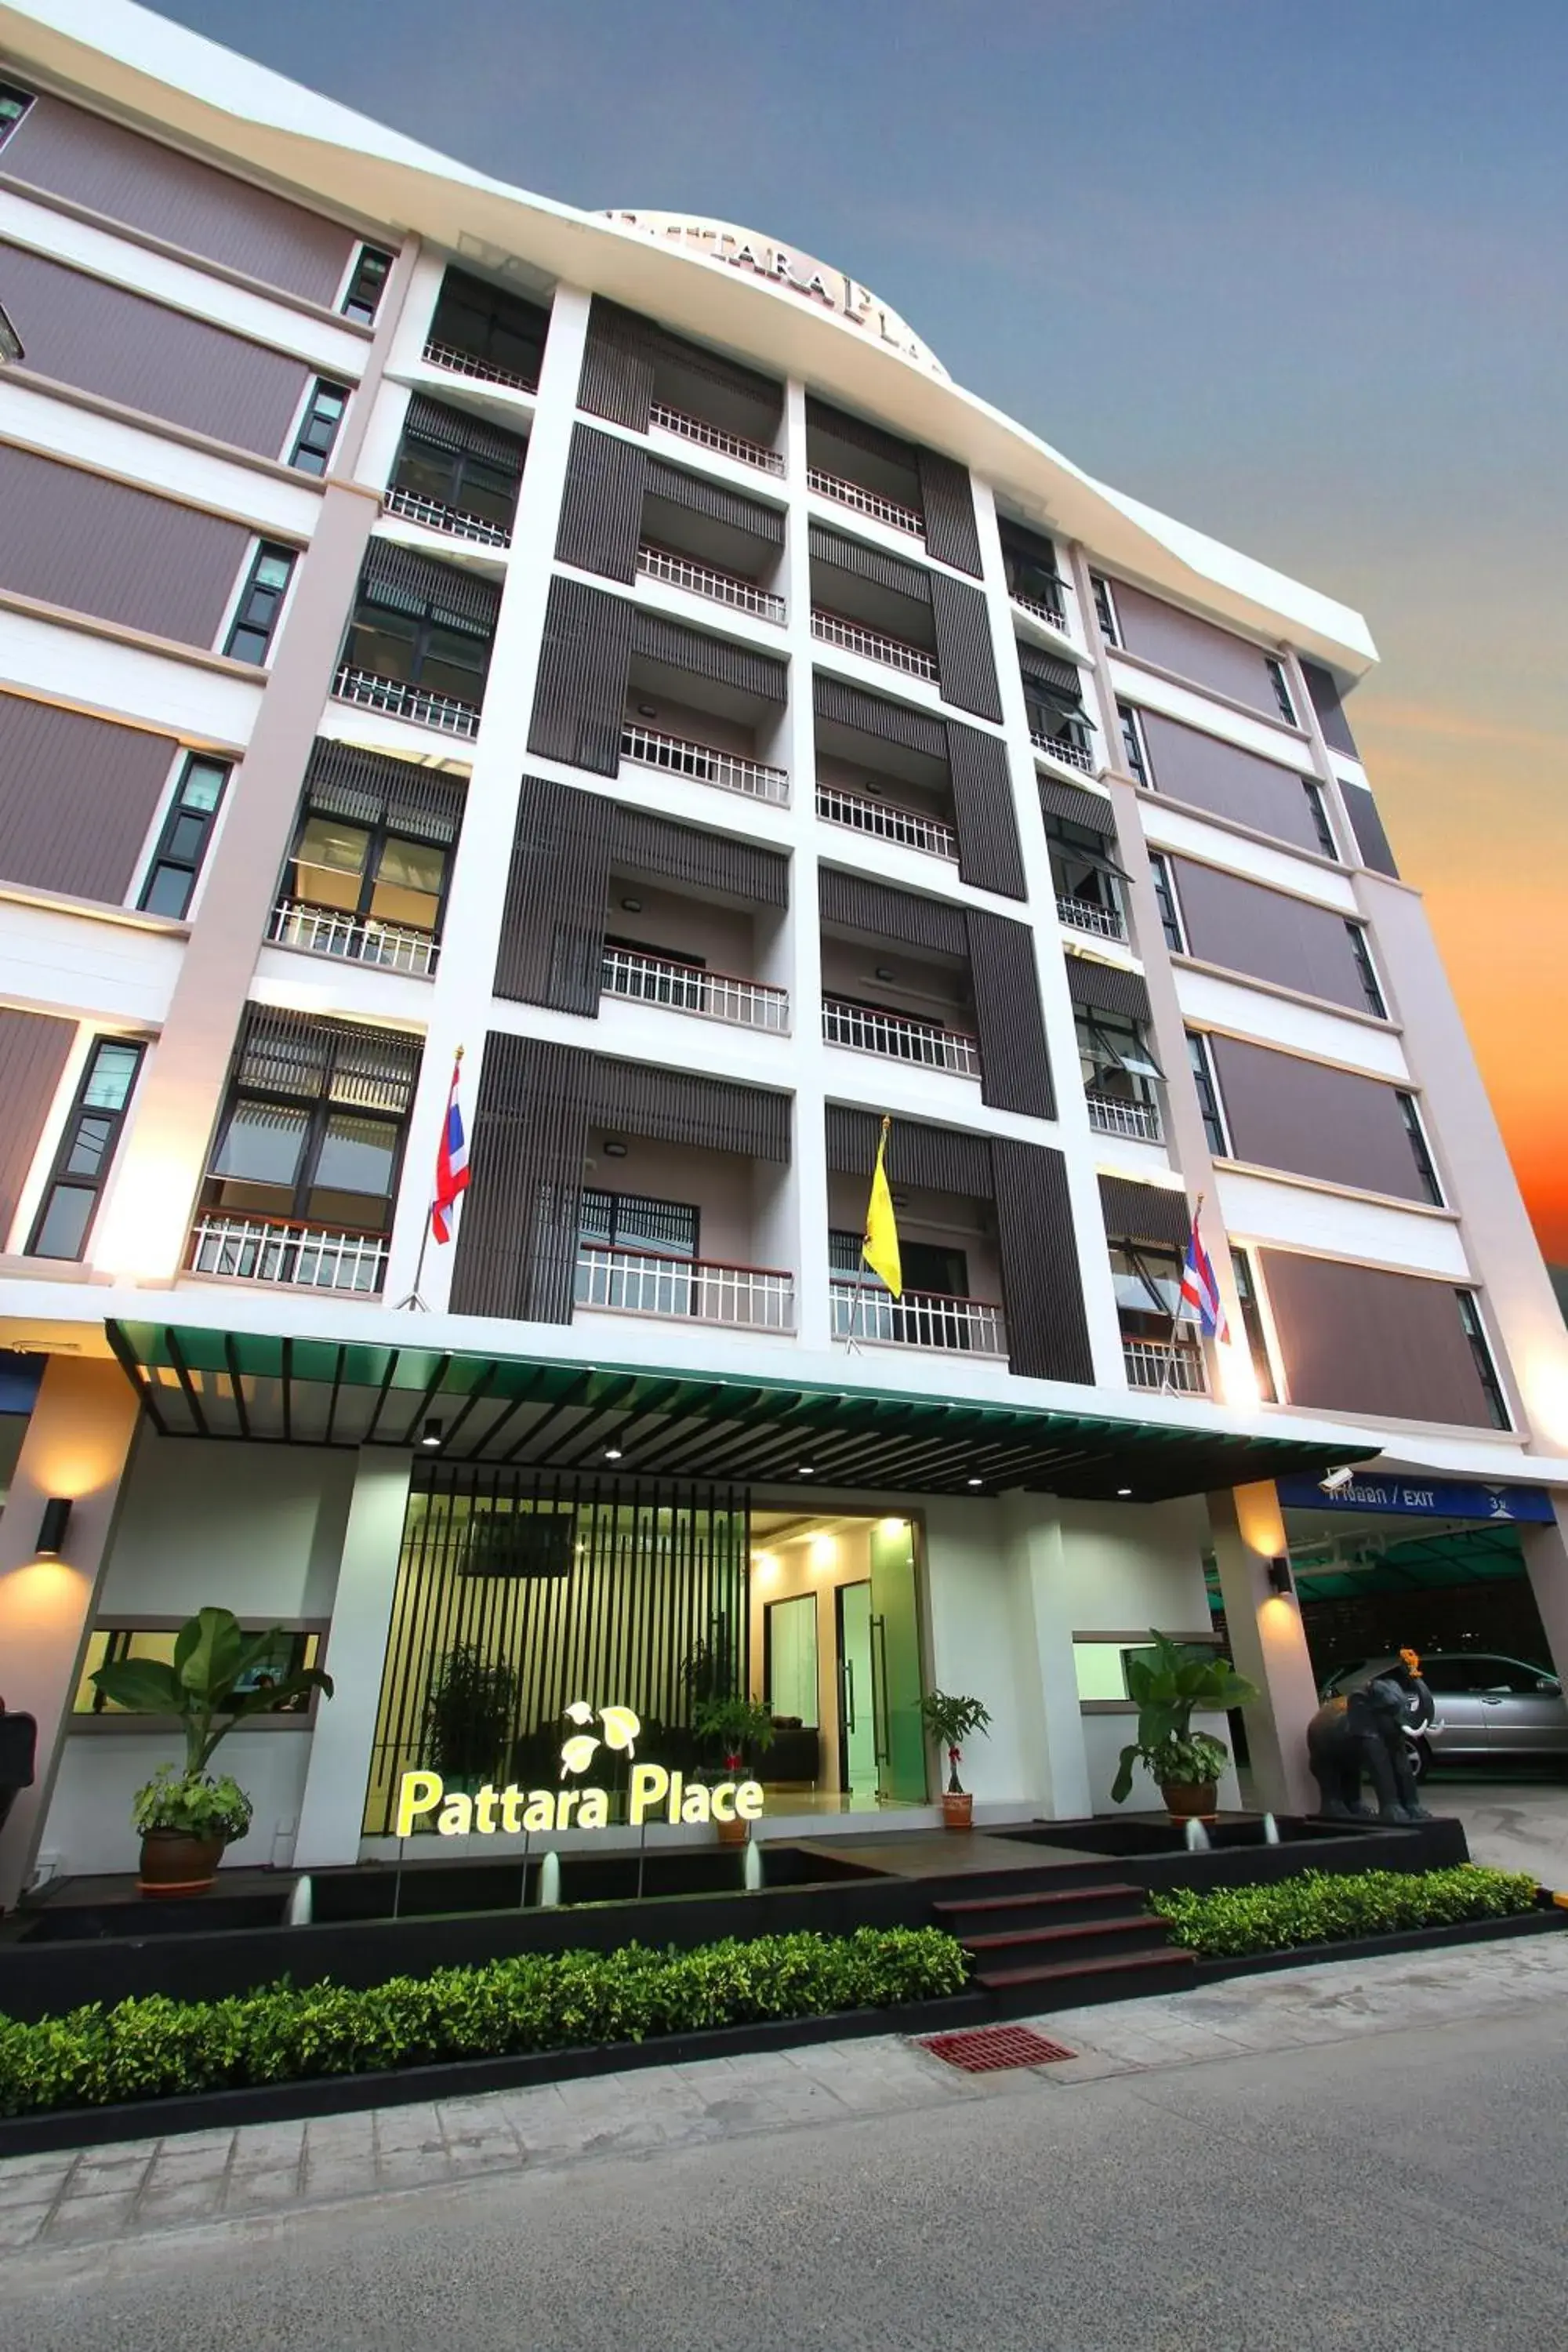 Property Building in Pattara Place